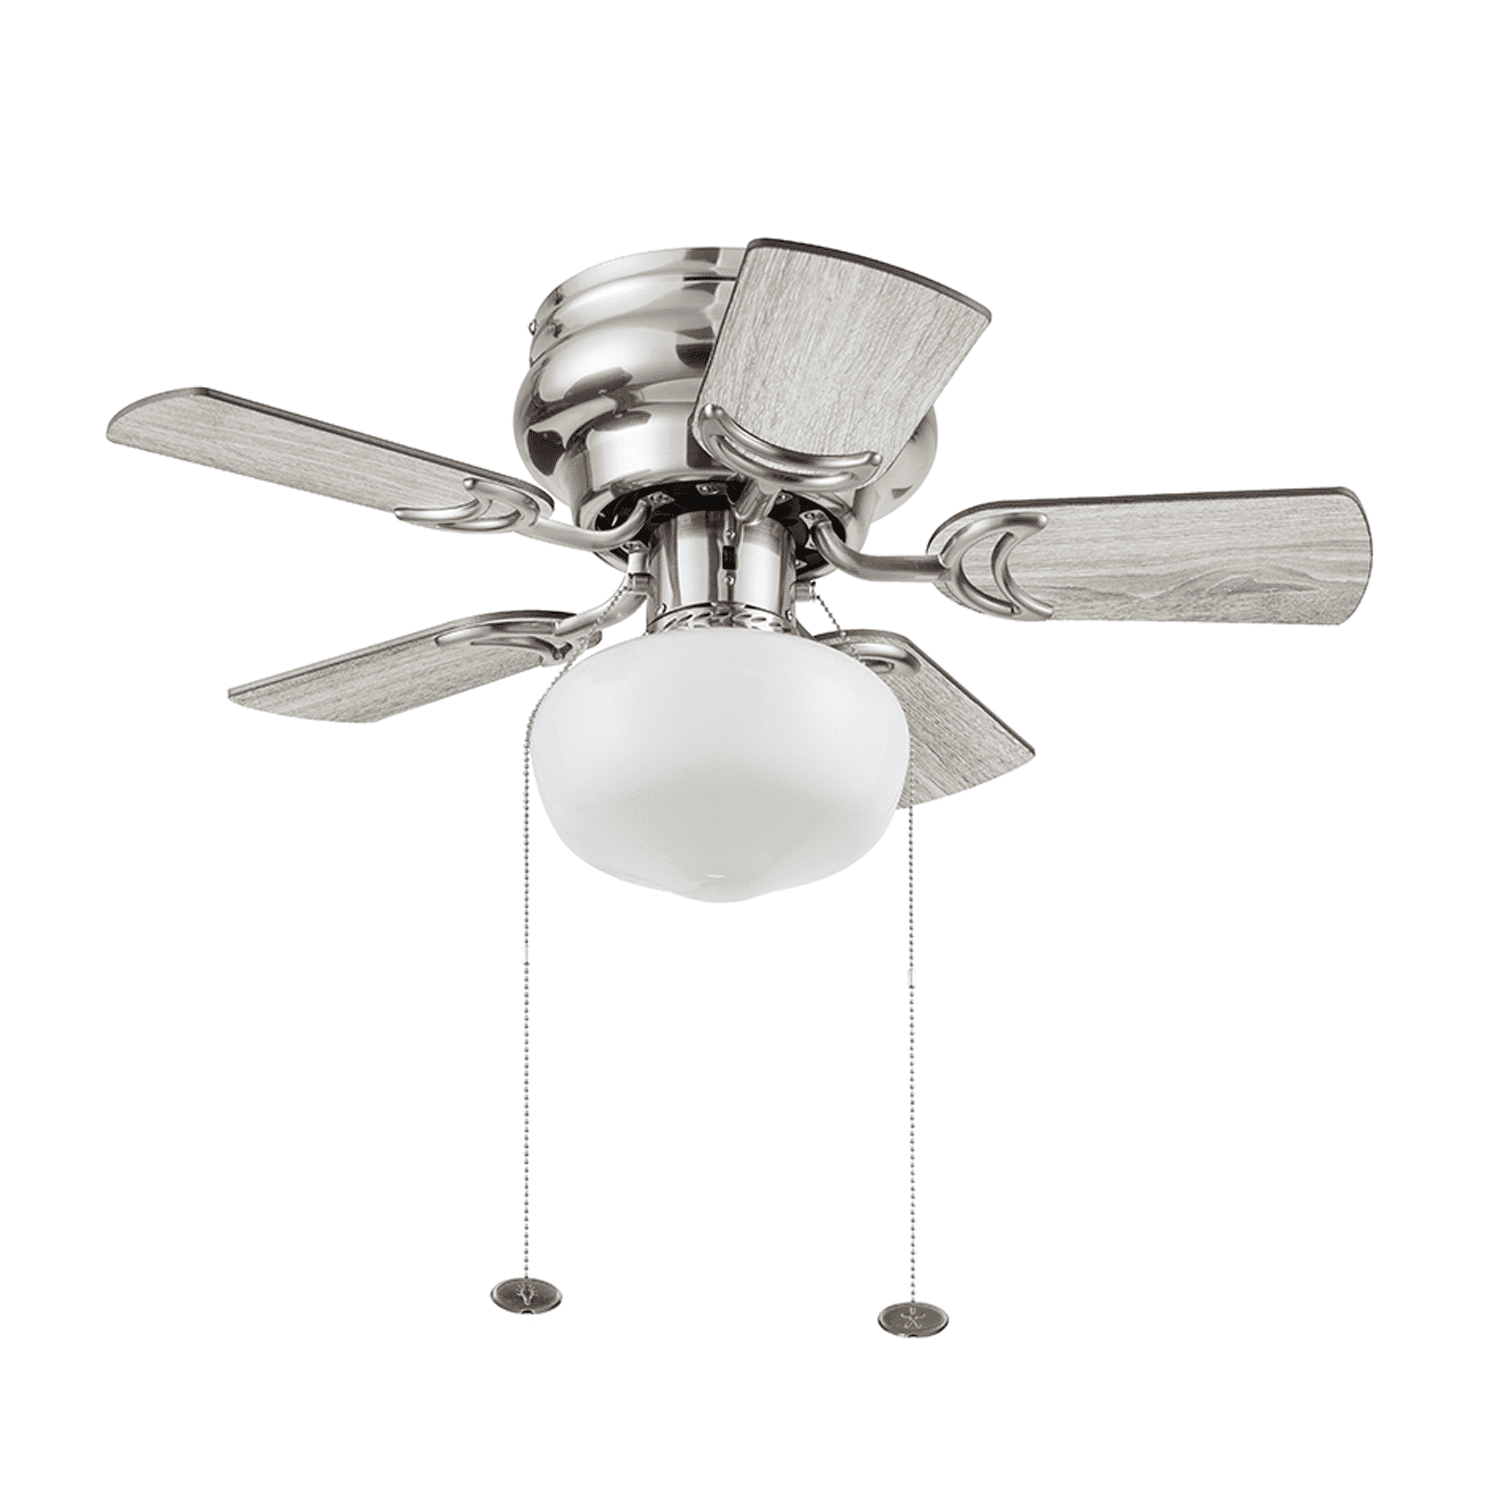 Room Ceiling Fan With 5 Blades